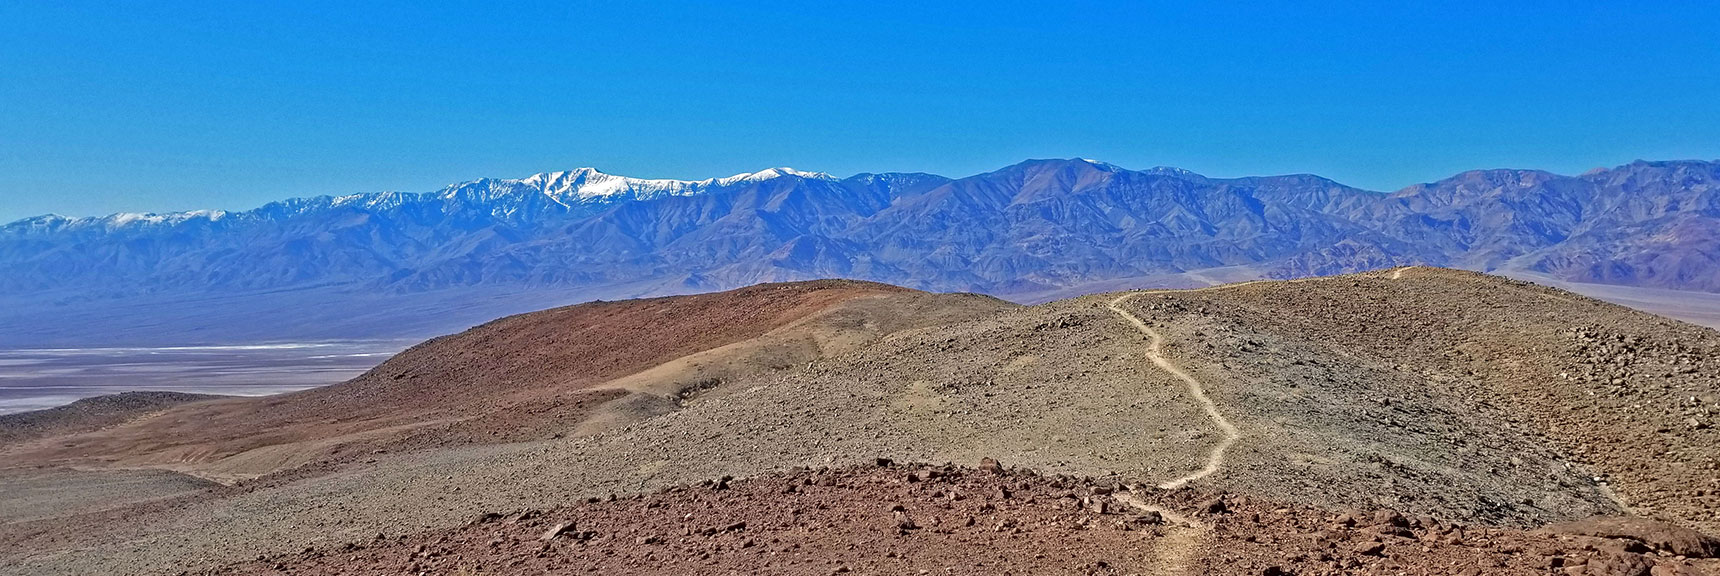 Panamint Mountains Viewed Along Unmarked Artist Drive Ridge Trail | Artists Drive Hidden Canyon Hikes | Death Valley National Park, California